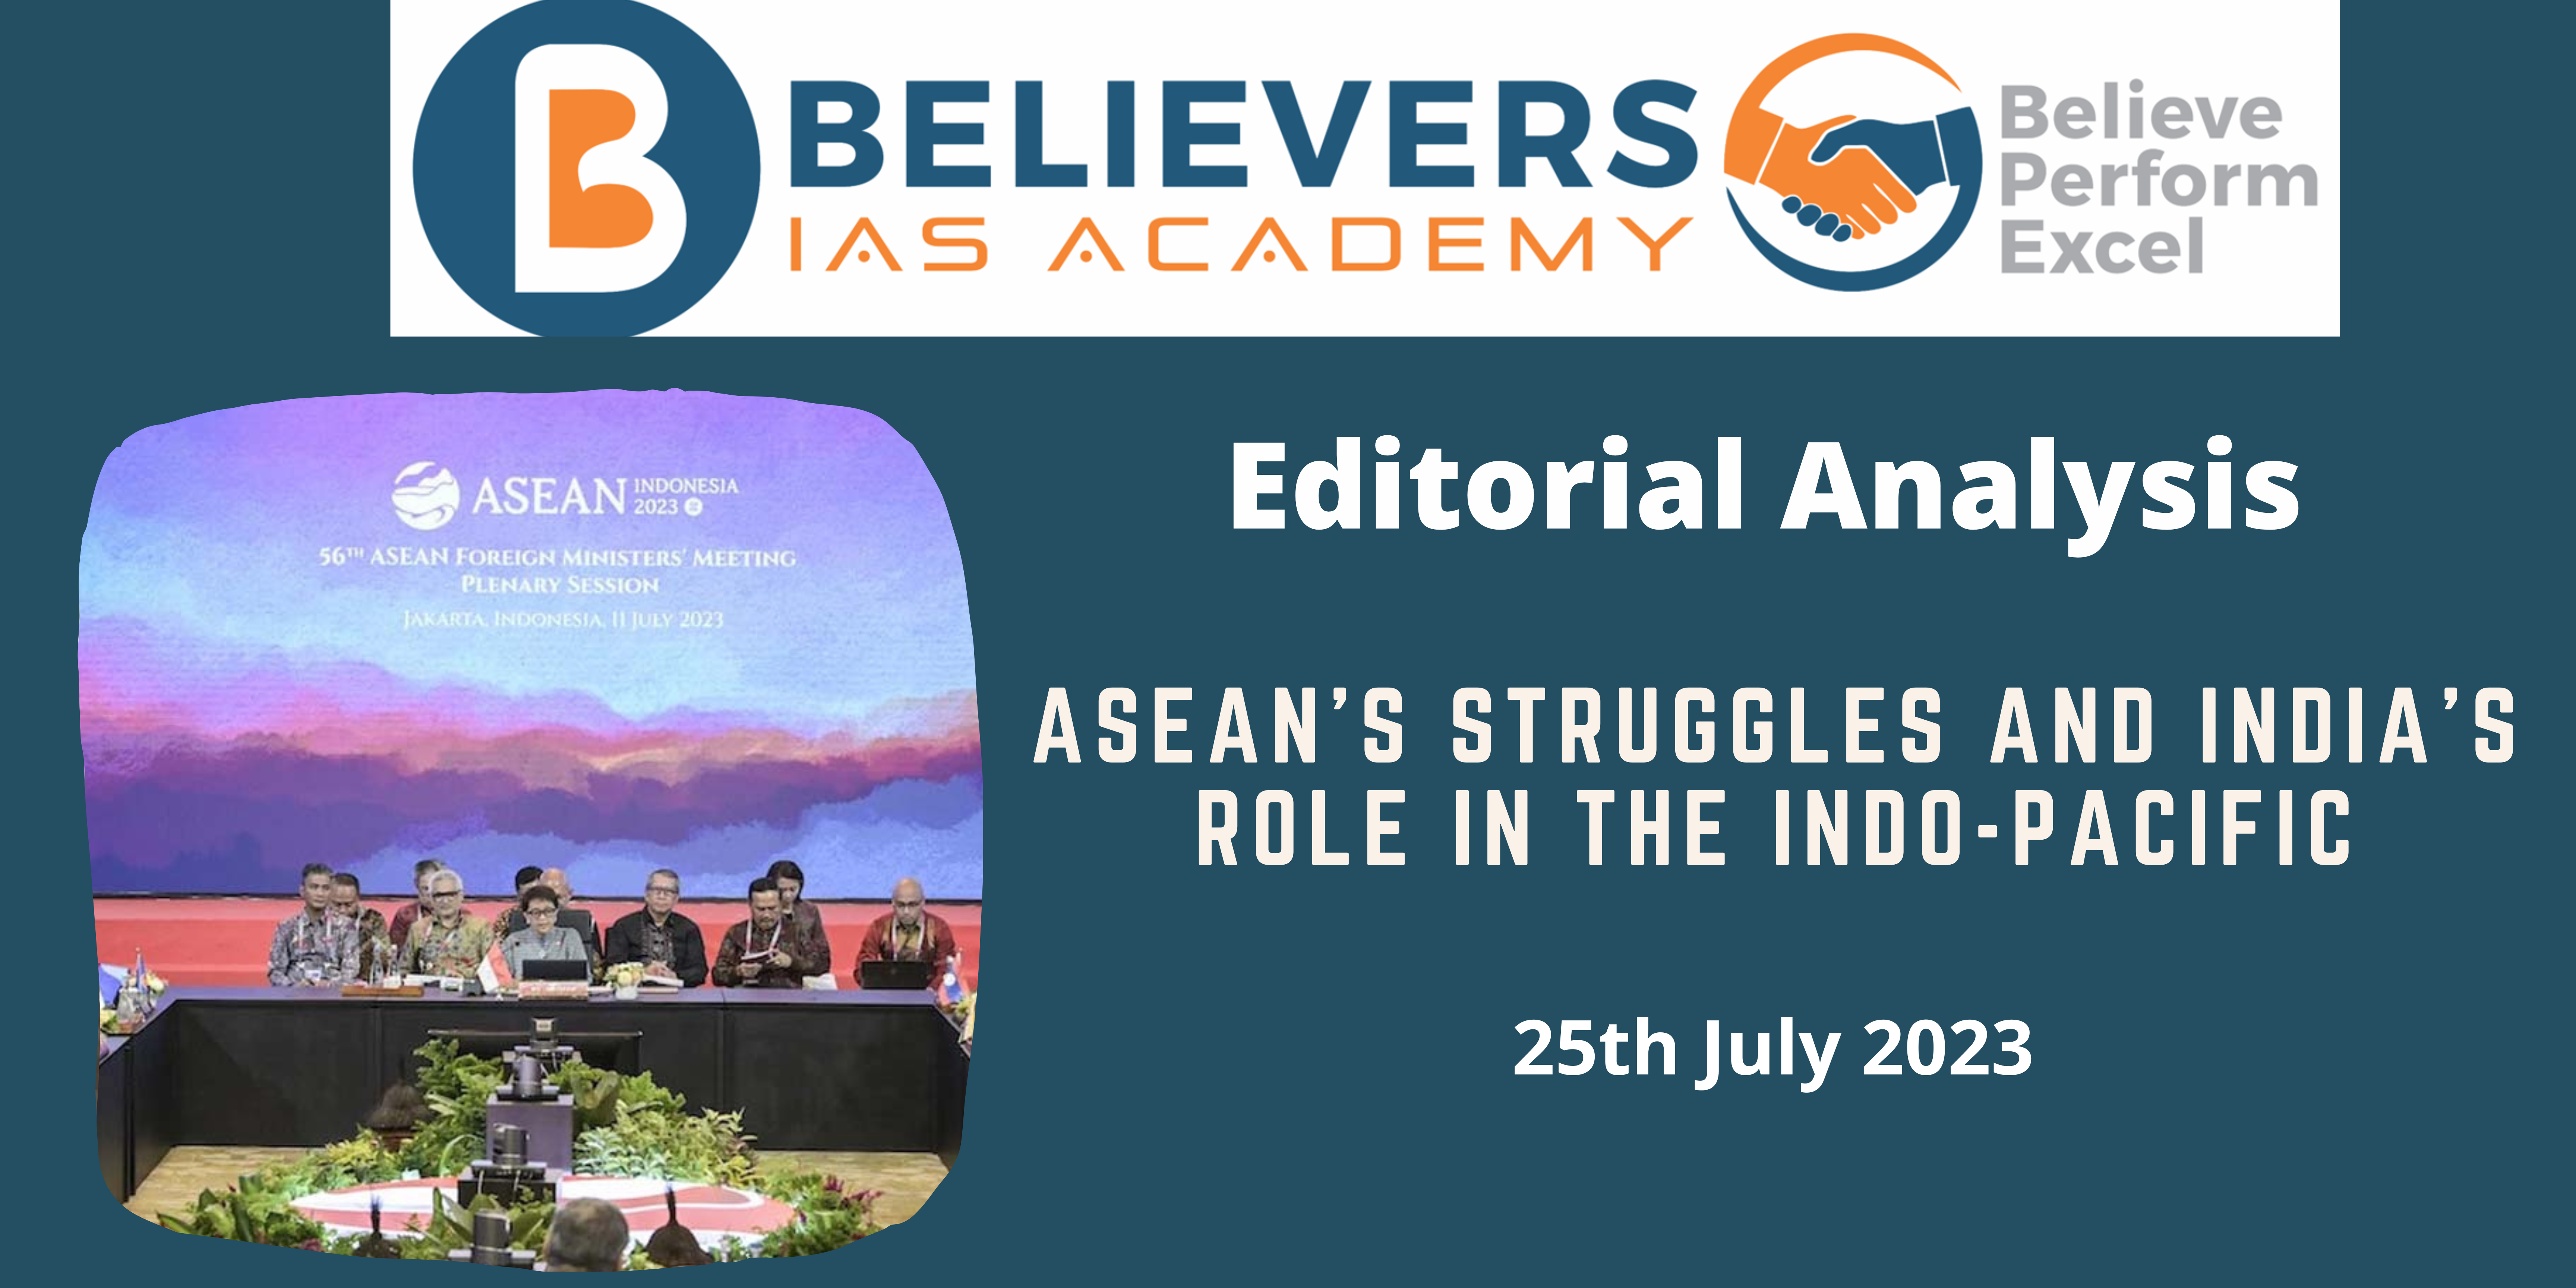 ASEAN's Struggles and India's Role in the Indo-Pacific